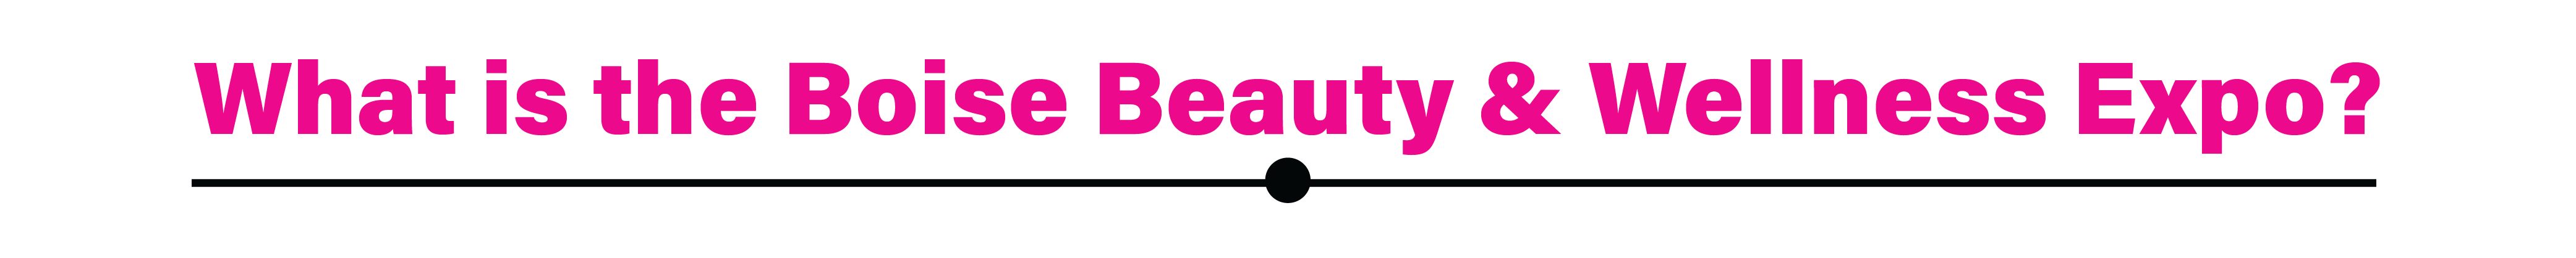 What is Boise Beauty Expo